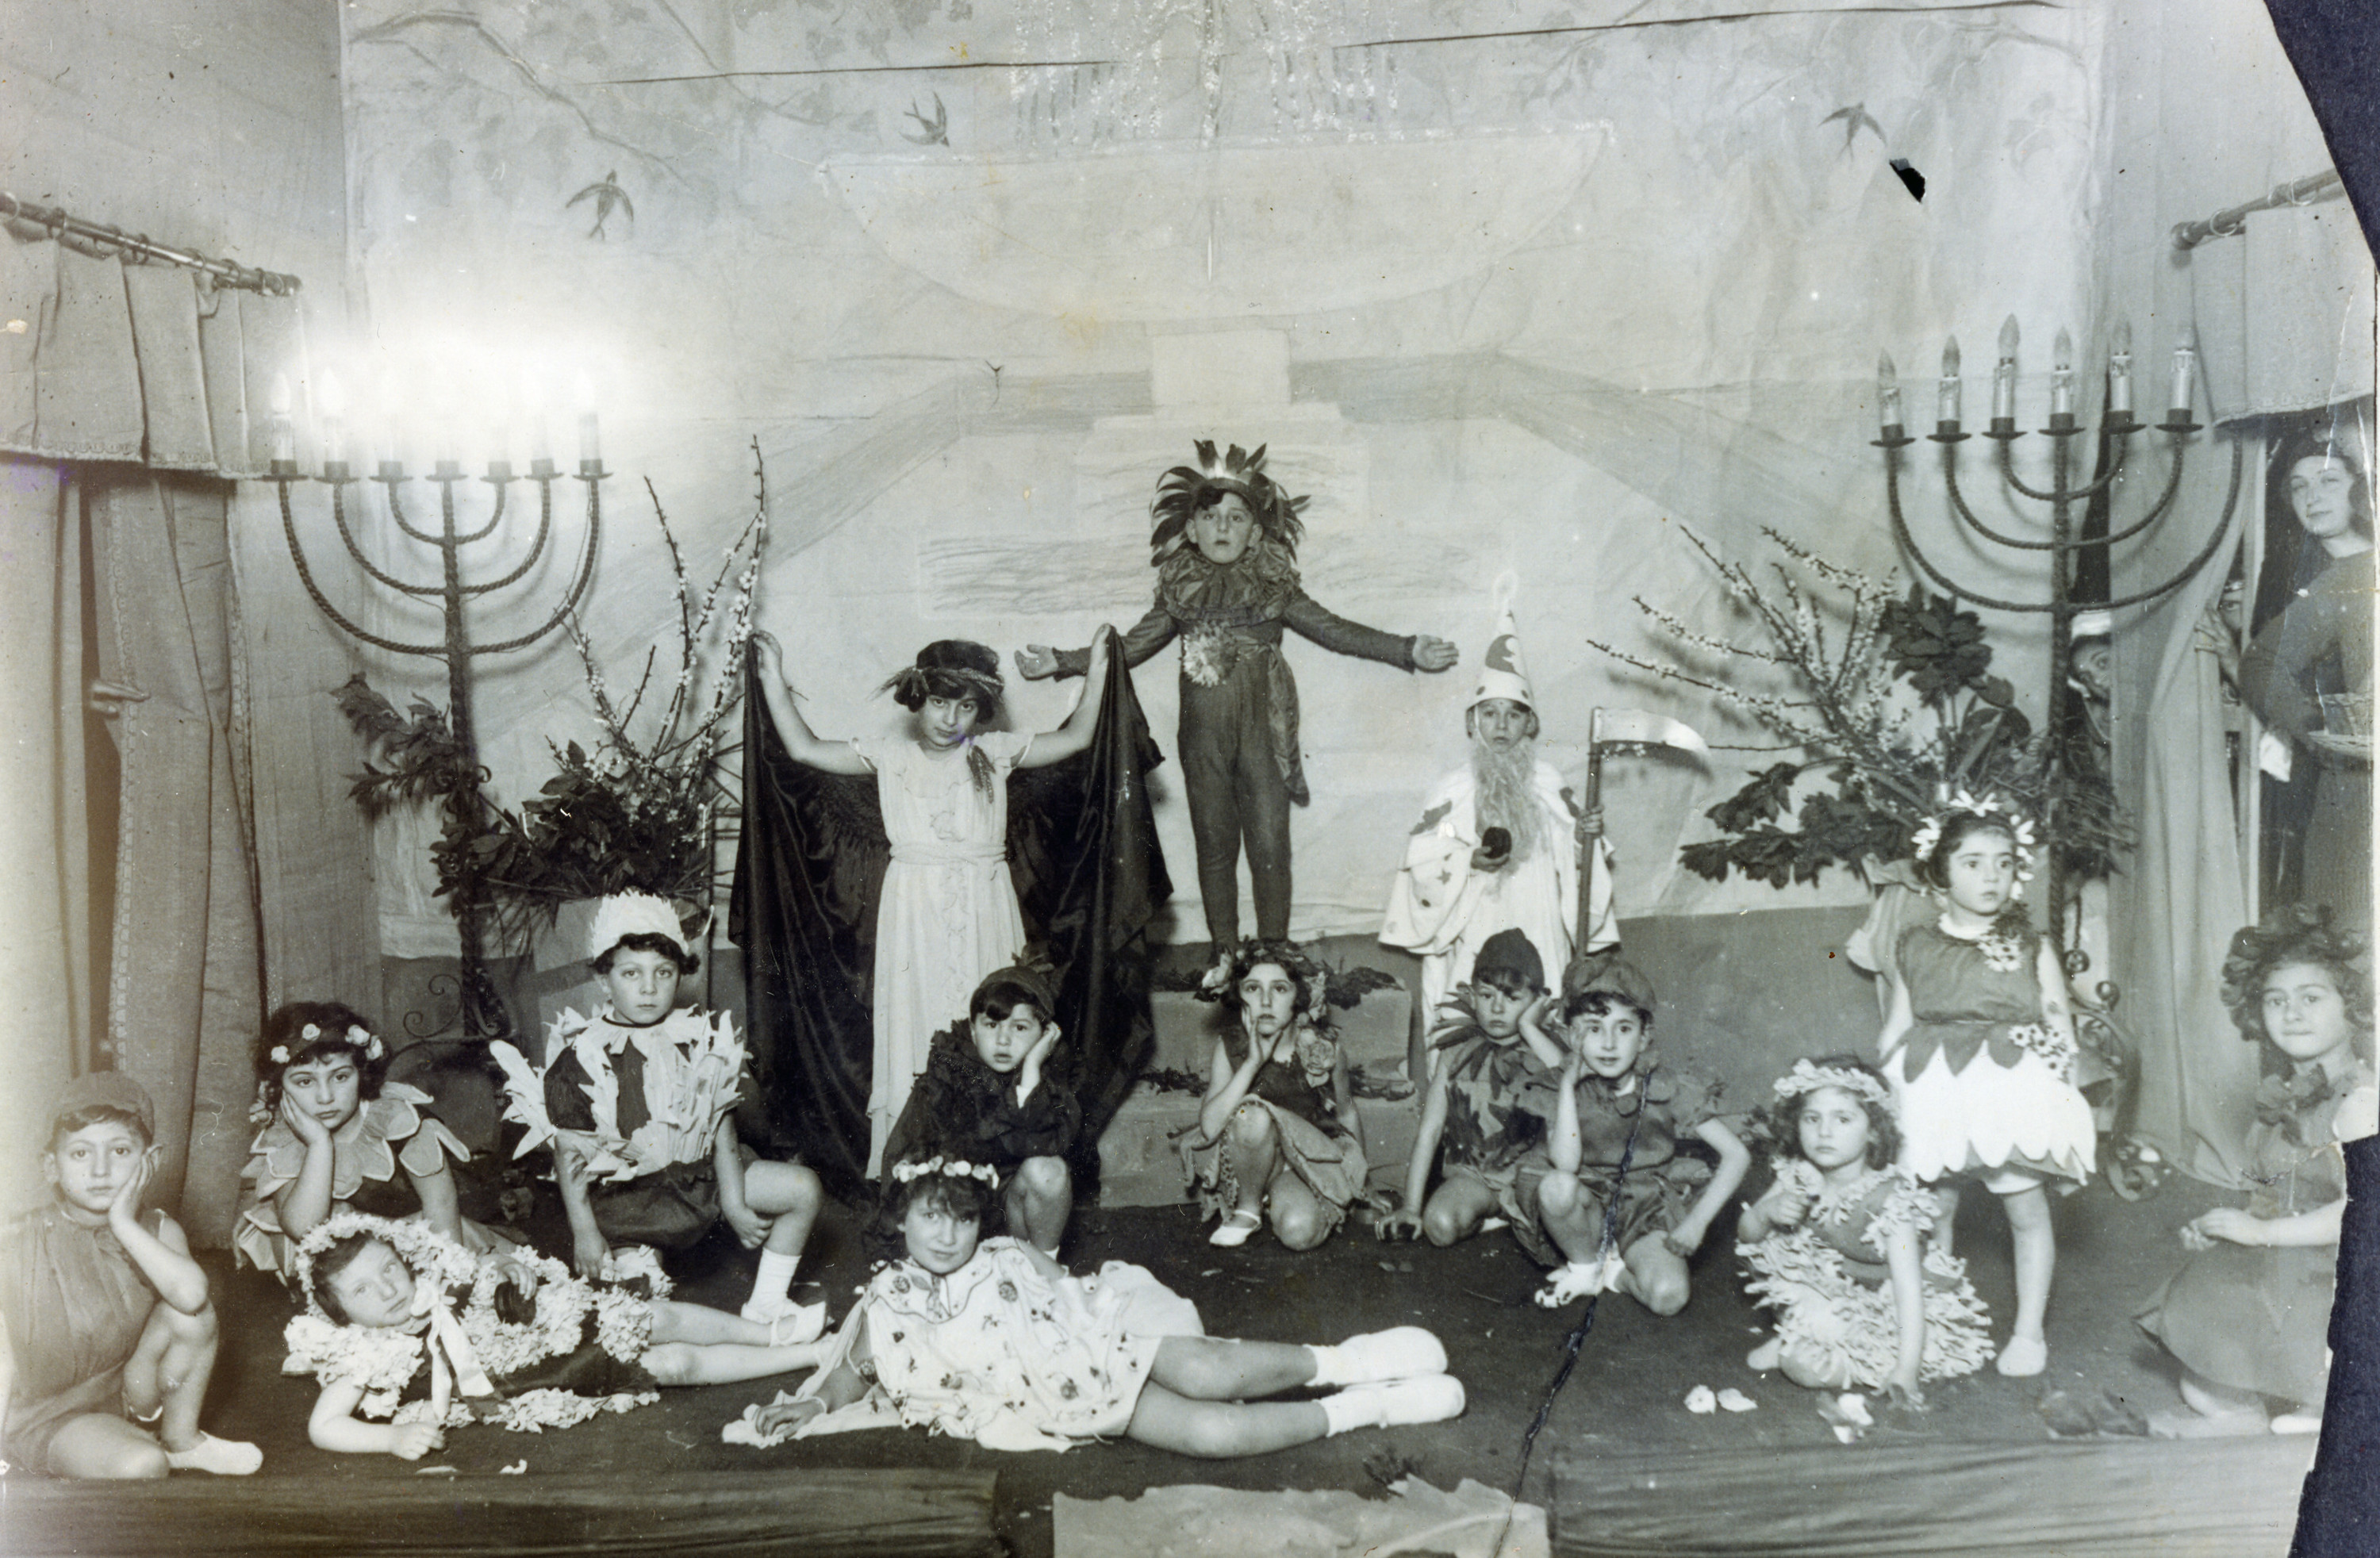 Italian Jewish children take part in a play to celebrate Shavuot.

Amont those pictured is Emma Di Capua (seated, third from the right).